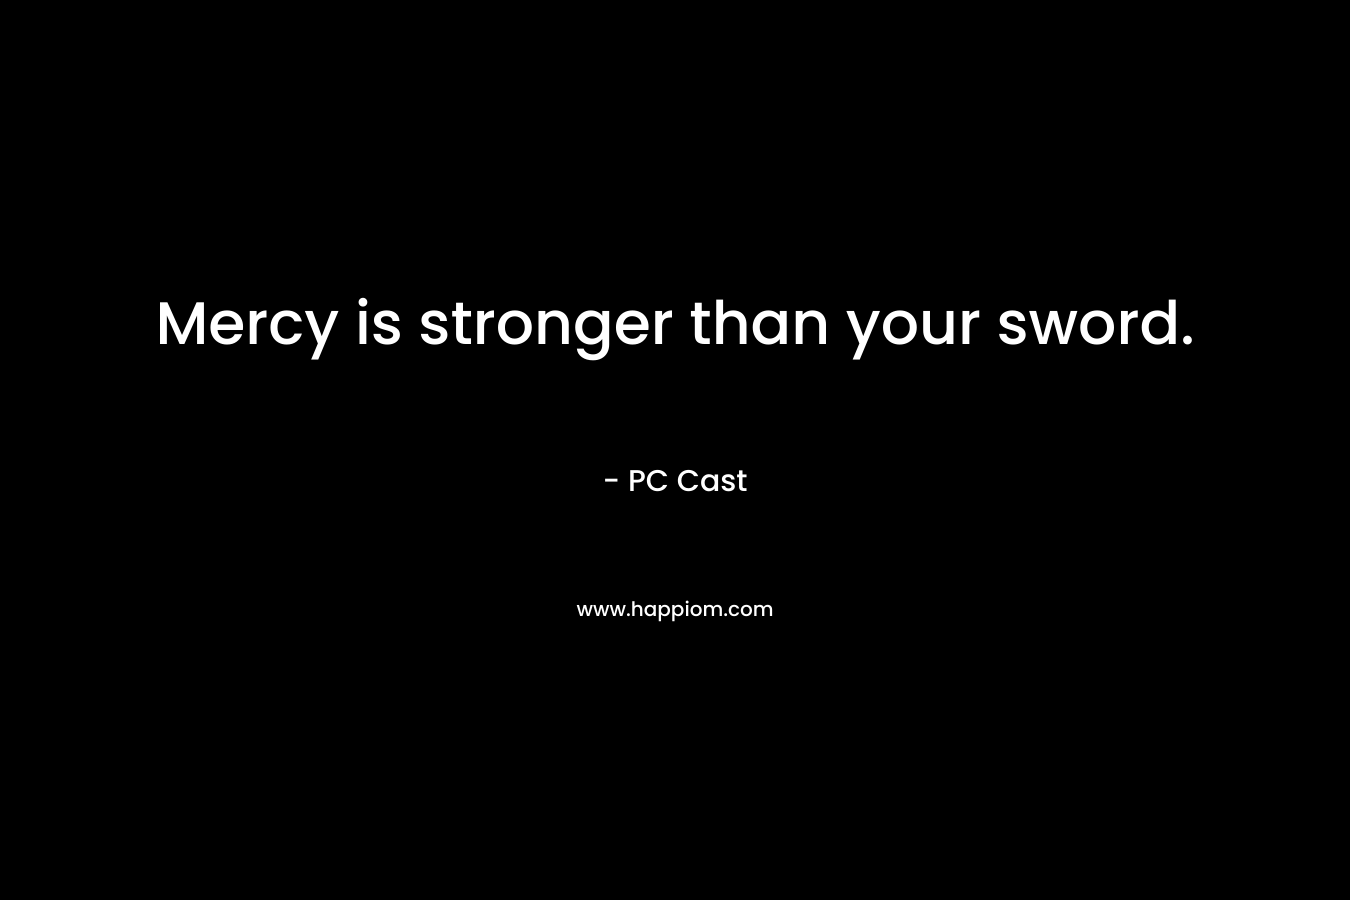 Mercy is stronger than your sword. – PC Cast